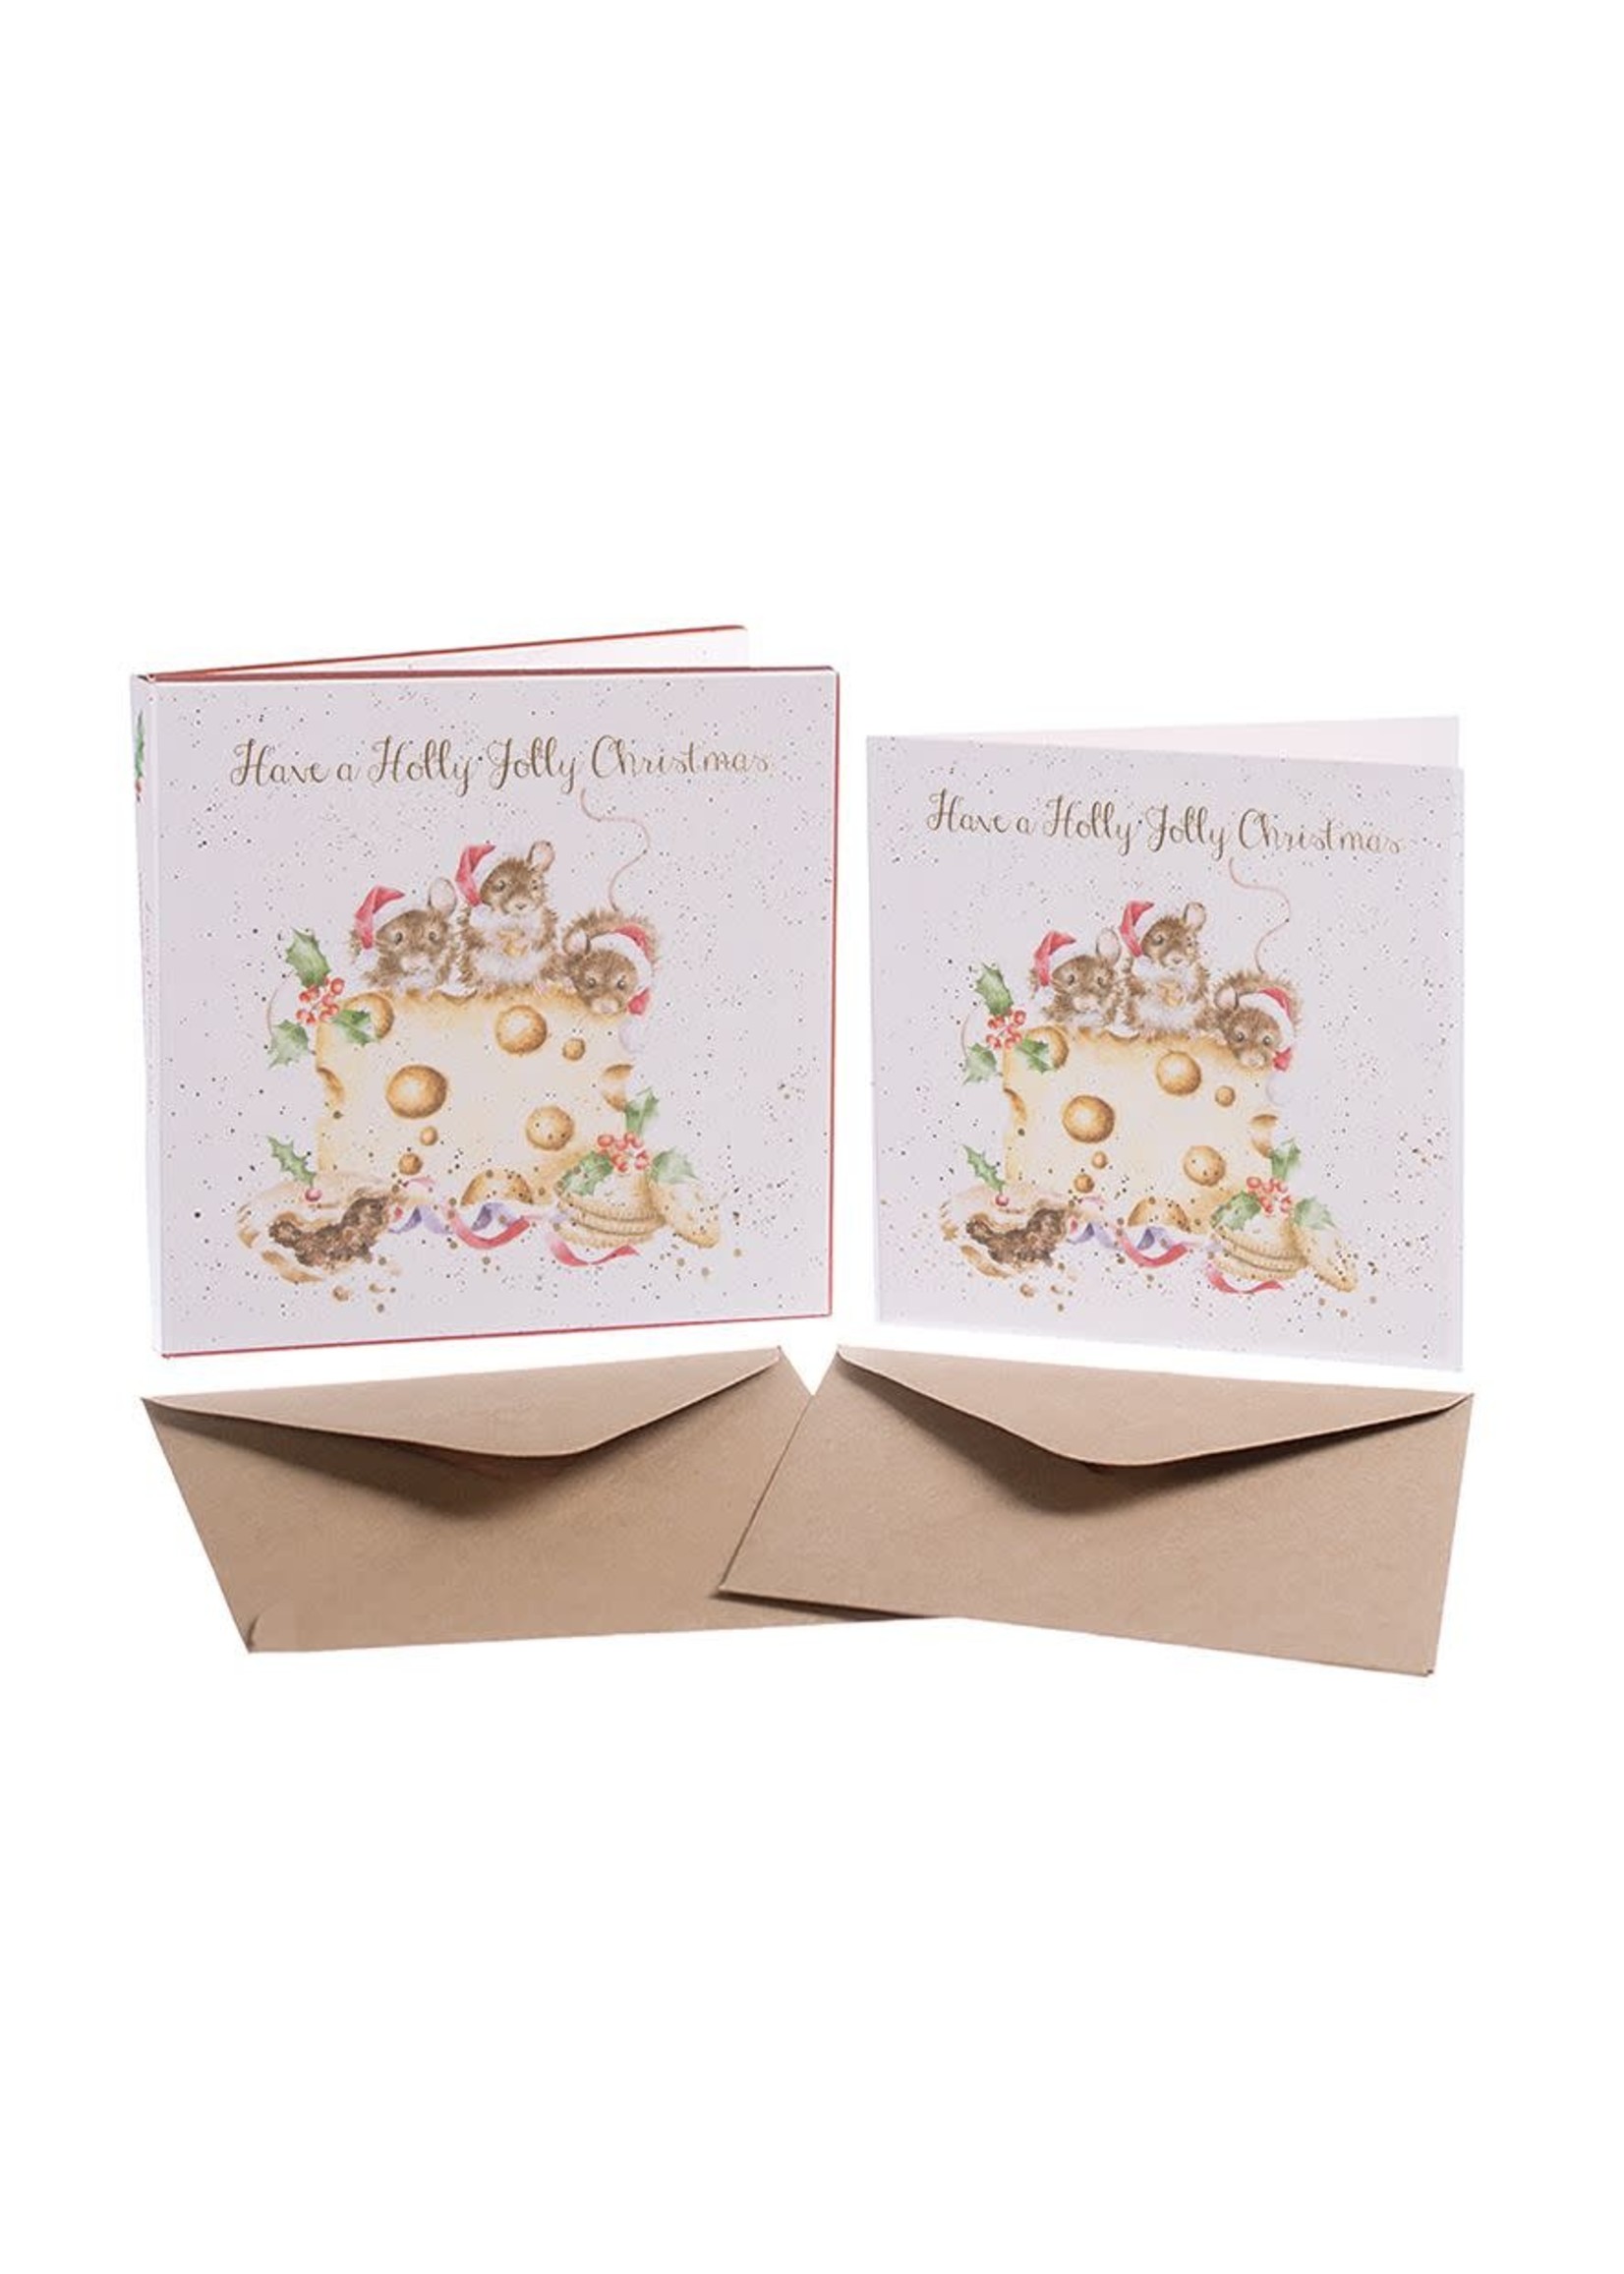 Wrendale Designs Holly Jolly Christmas Notecard set - 8 cards